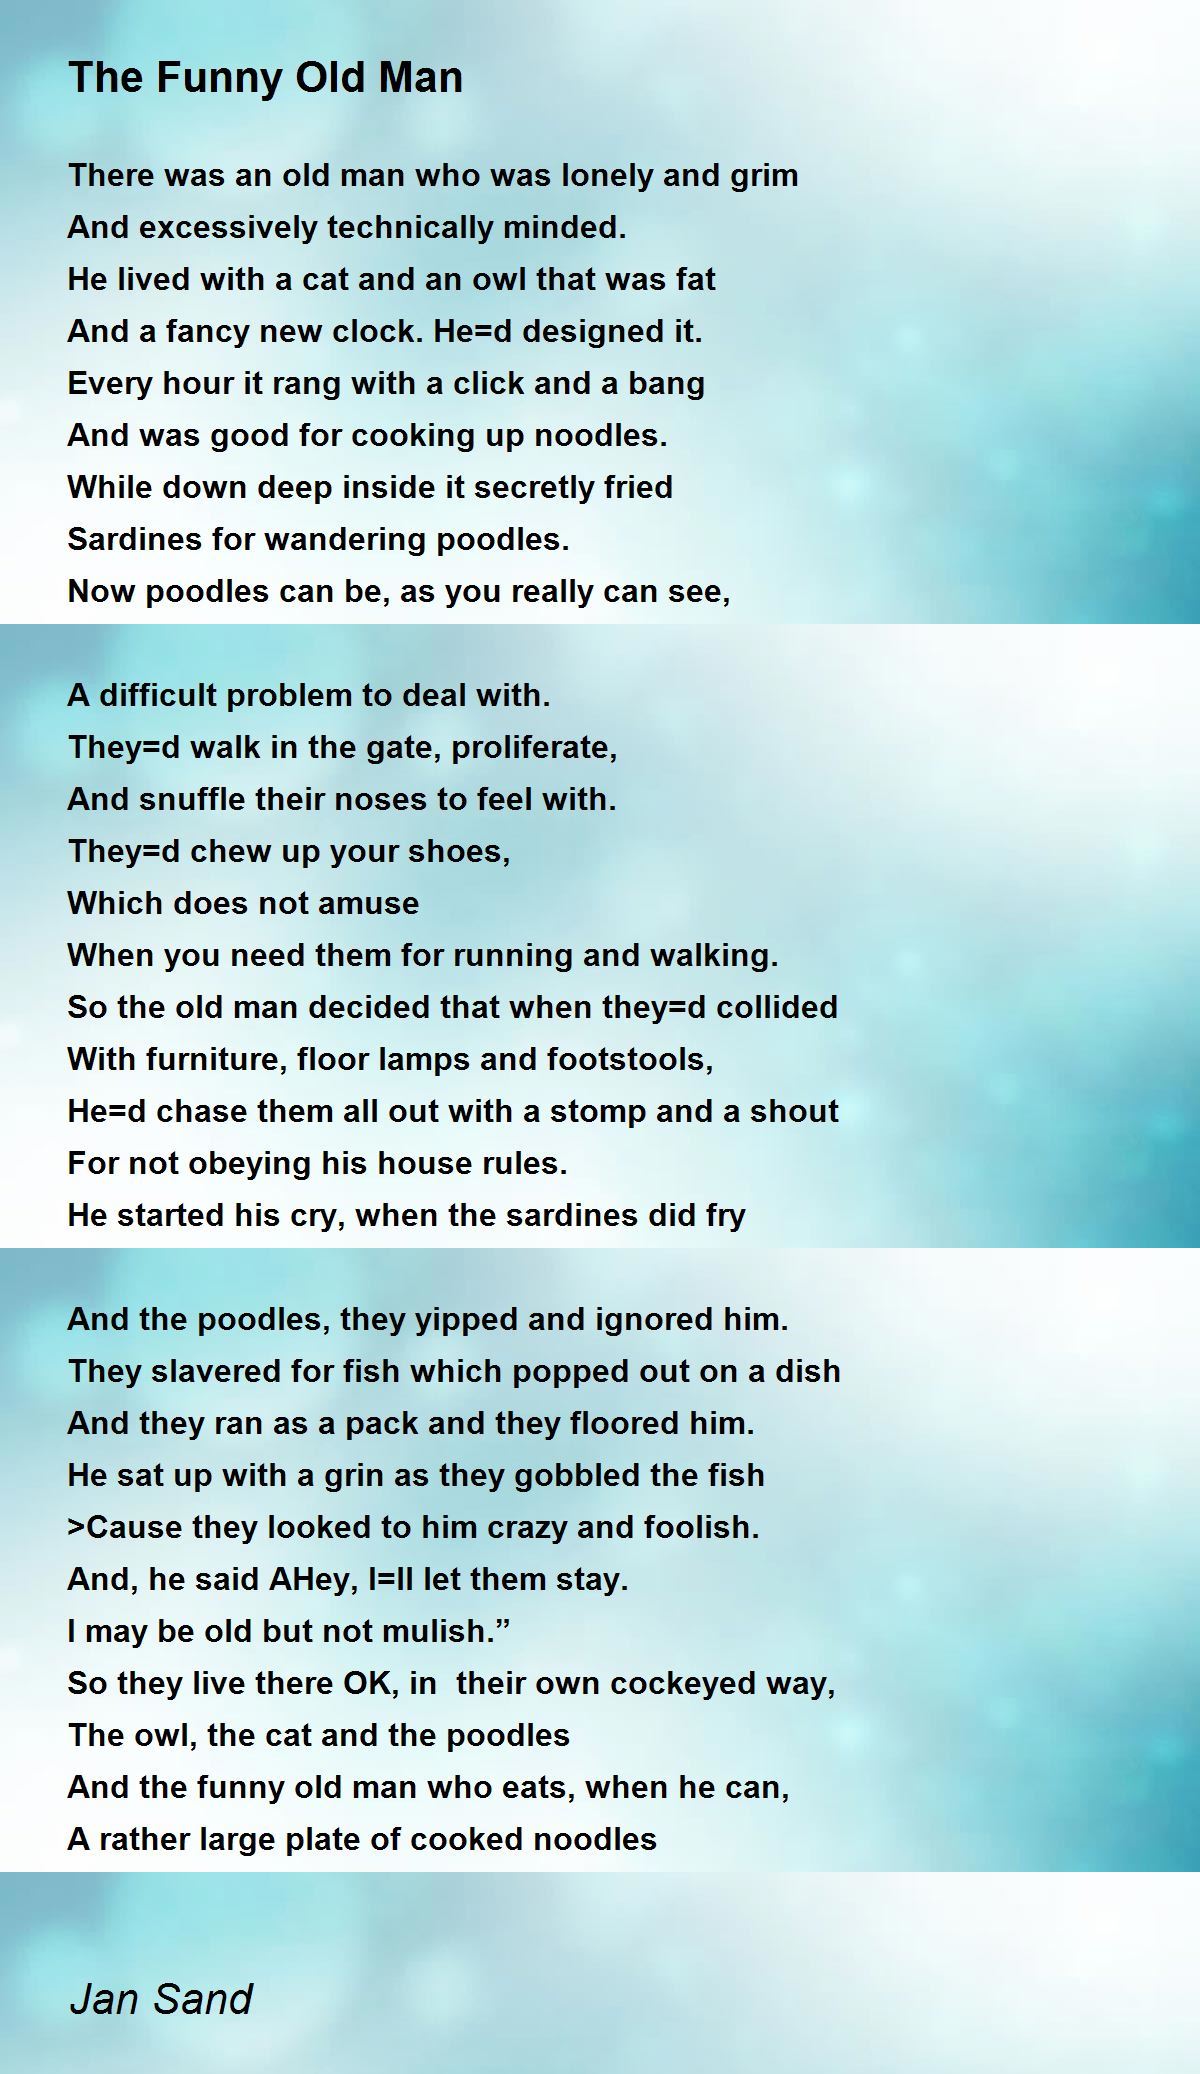 The Funny Old Man - The Funny Old Man Poem by Jan Sand